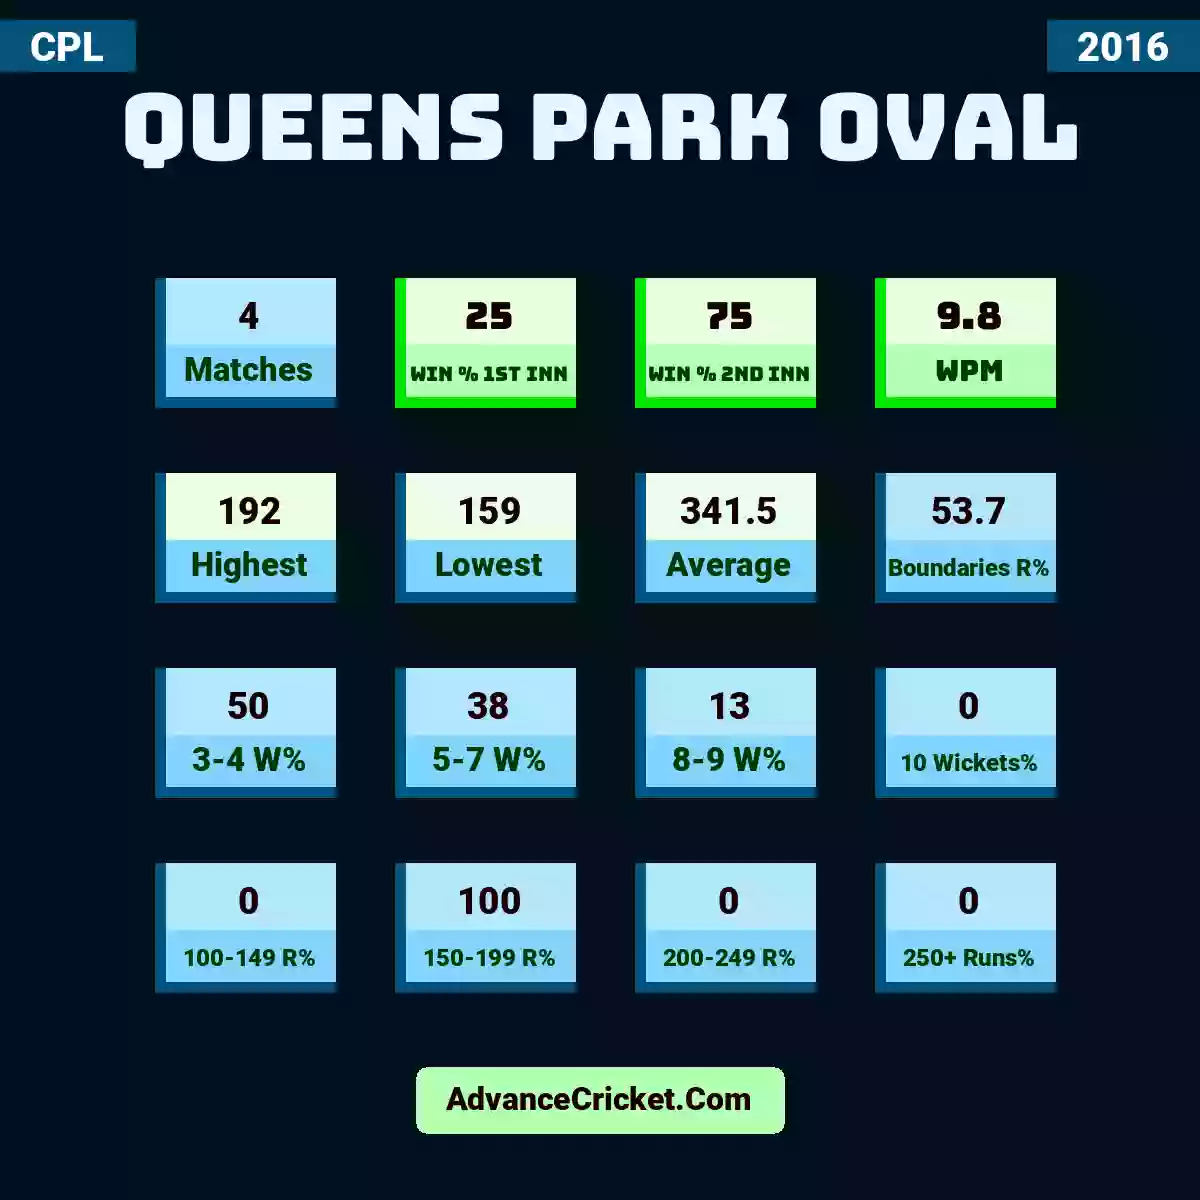 Image showing Queens Park Oval with Matches: 4, Win % 1st Inn: 25, Win % 2nd Inn: 75, WPM: 9.8, Highest: 192, Lowest: 159, Average: 341.5, Boundaries R%: 53.7, 3-4 W%: 50, 5-7 W%: 38, 8-9 W%: 13, 10 Wickets%: 0, 100-149 R%: 0, 150-199 R%: 100, 200-249 R%: 0, 250+ Runs%: 0.